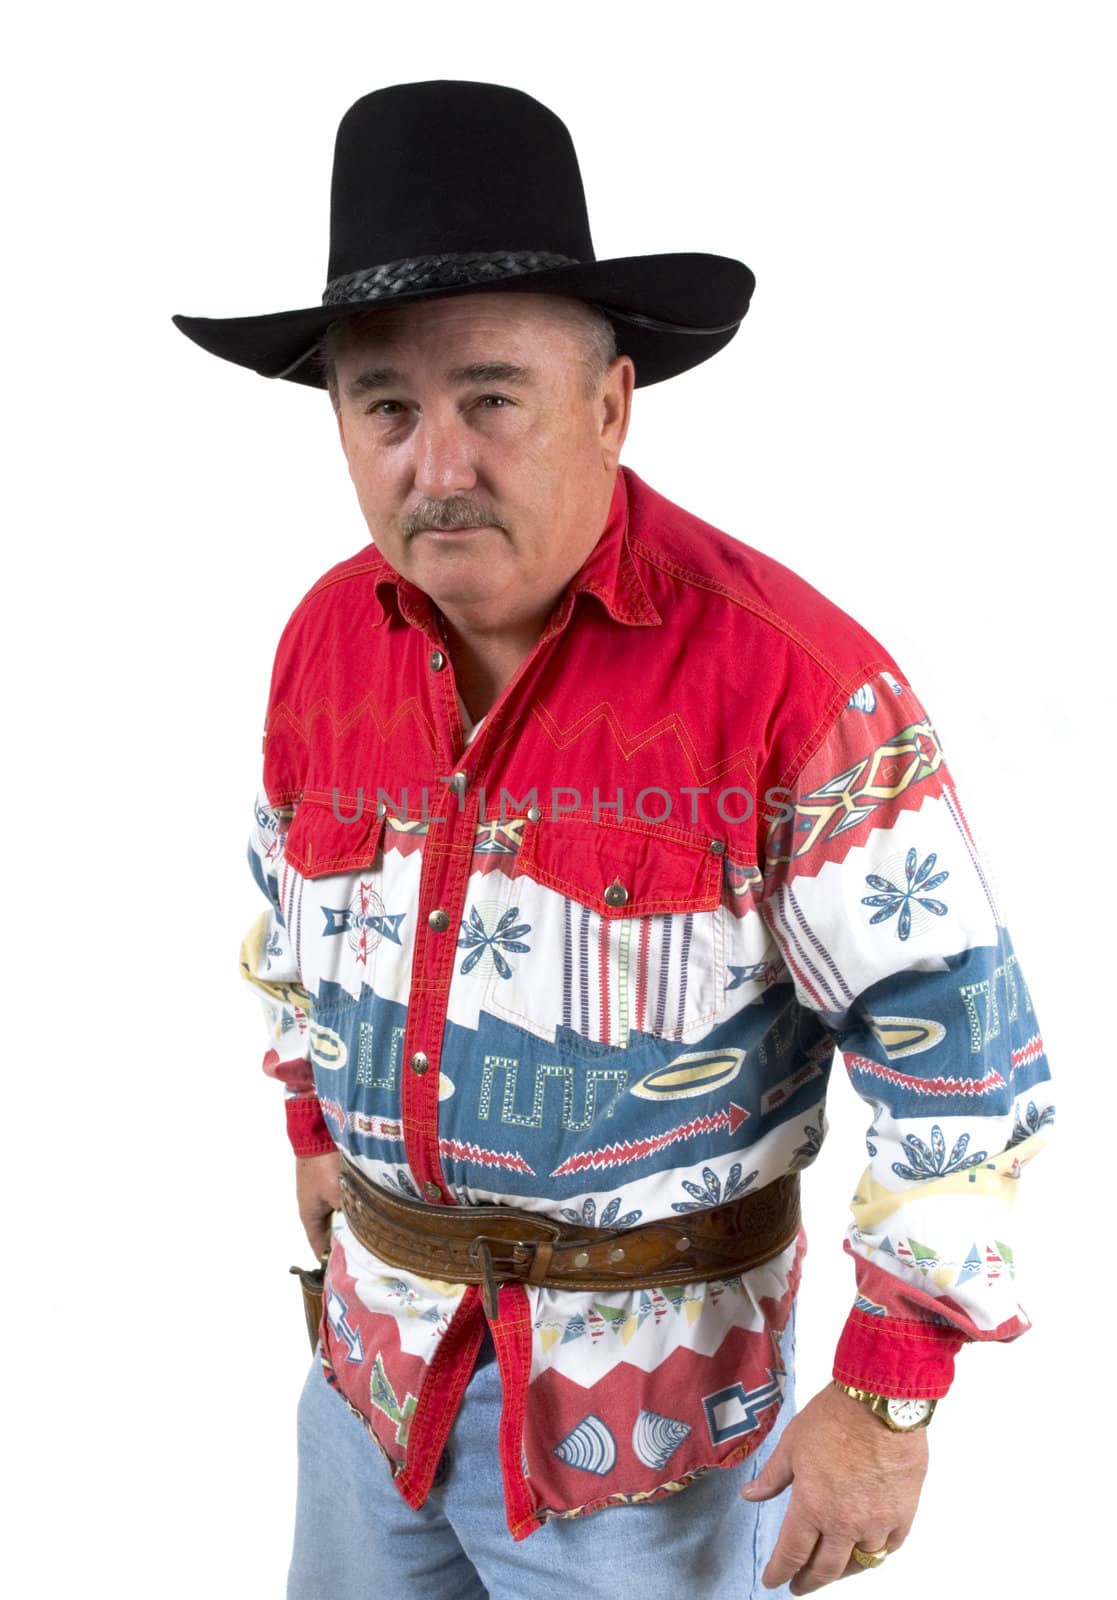 Old cowboy staring down opponent ready to draw revolver on a white background